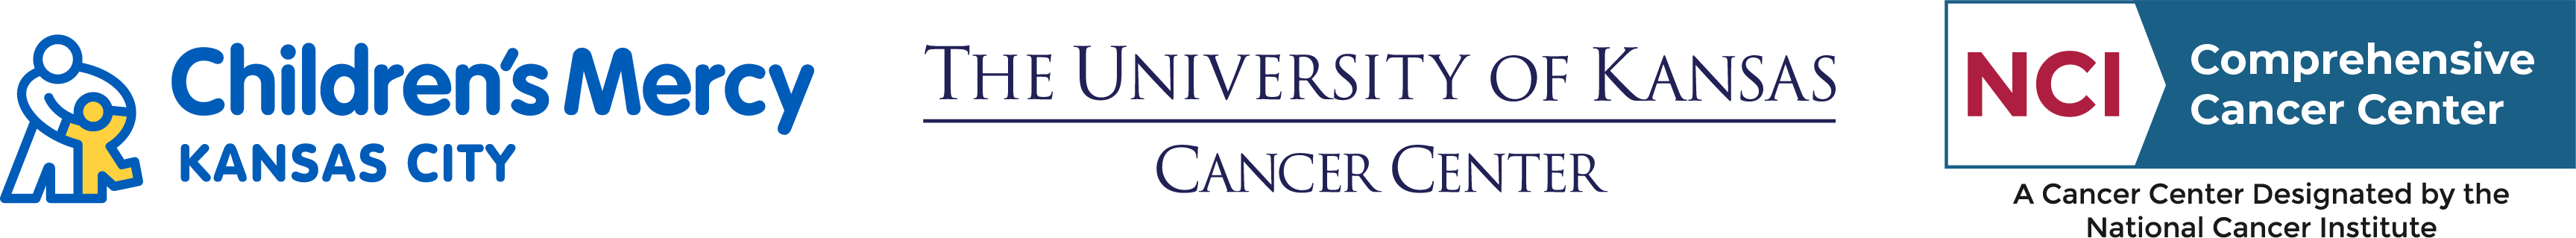 Logos for the following: Children's Mercy Kansas City, The University of Kansas Cancer Center, and NCI Cancer Center: A Cancer Center Designated by the National Cancer Institute.